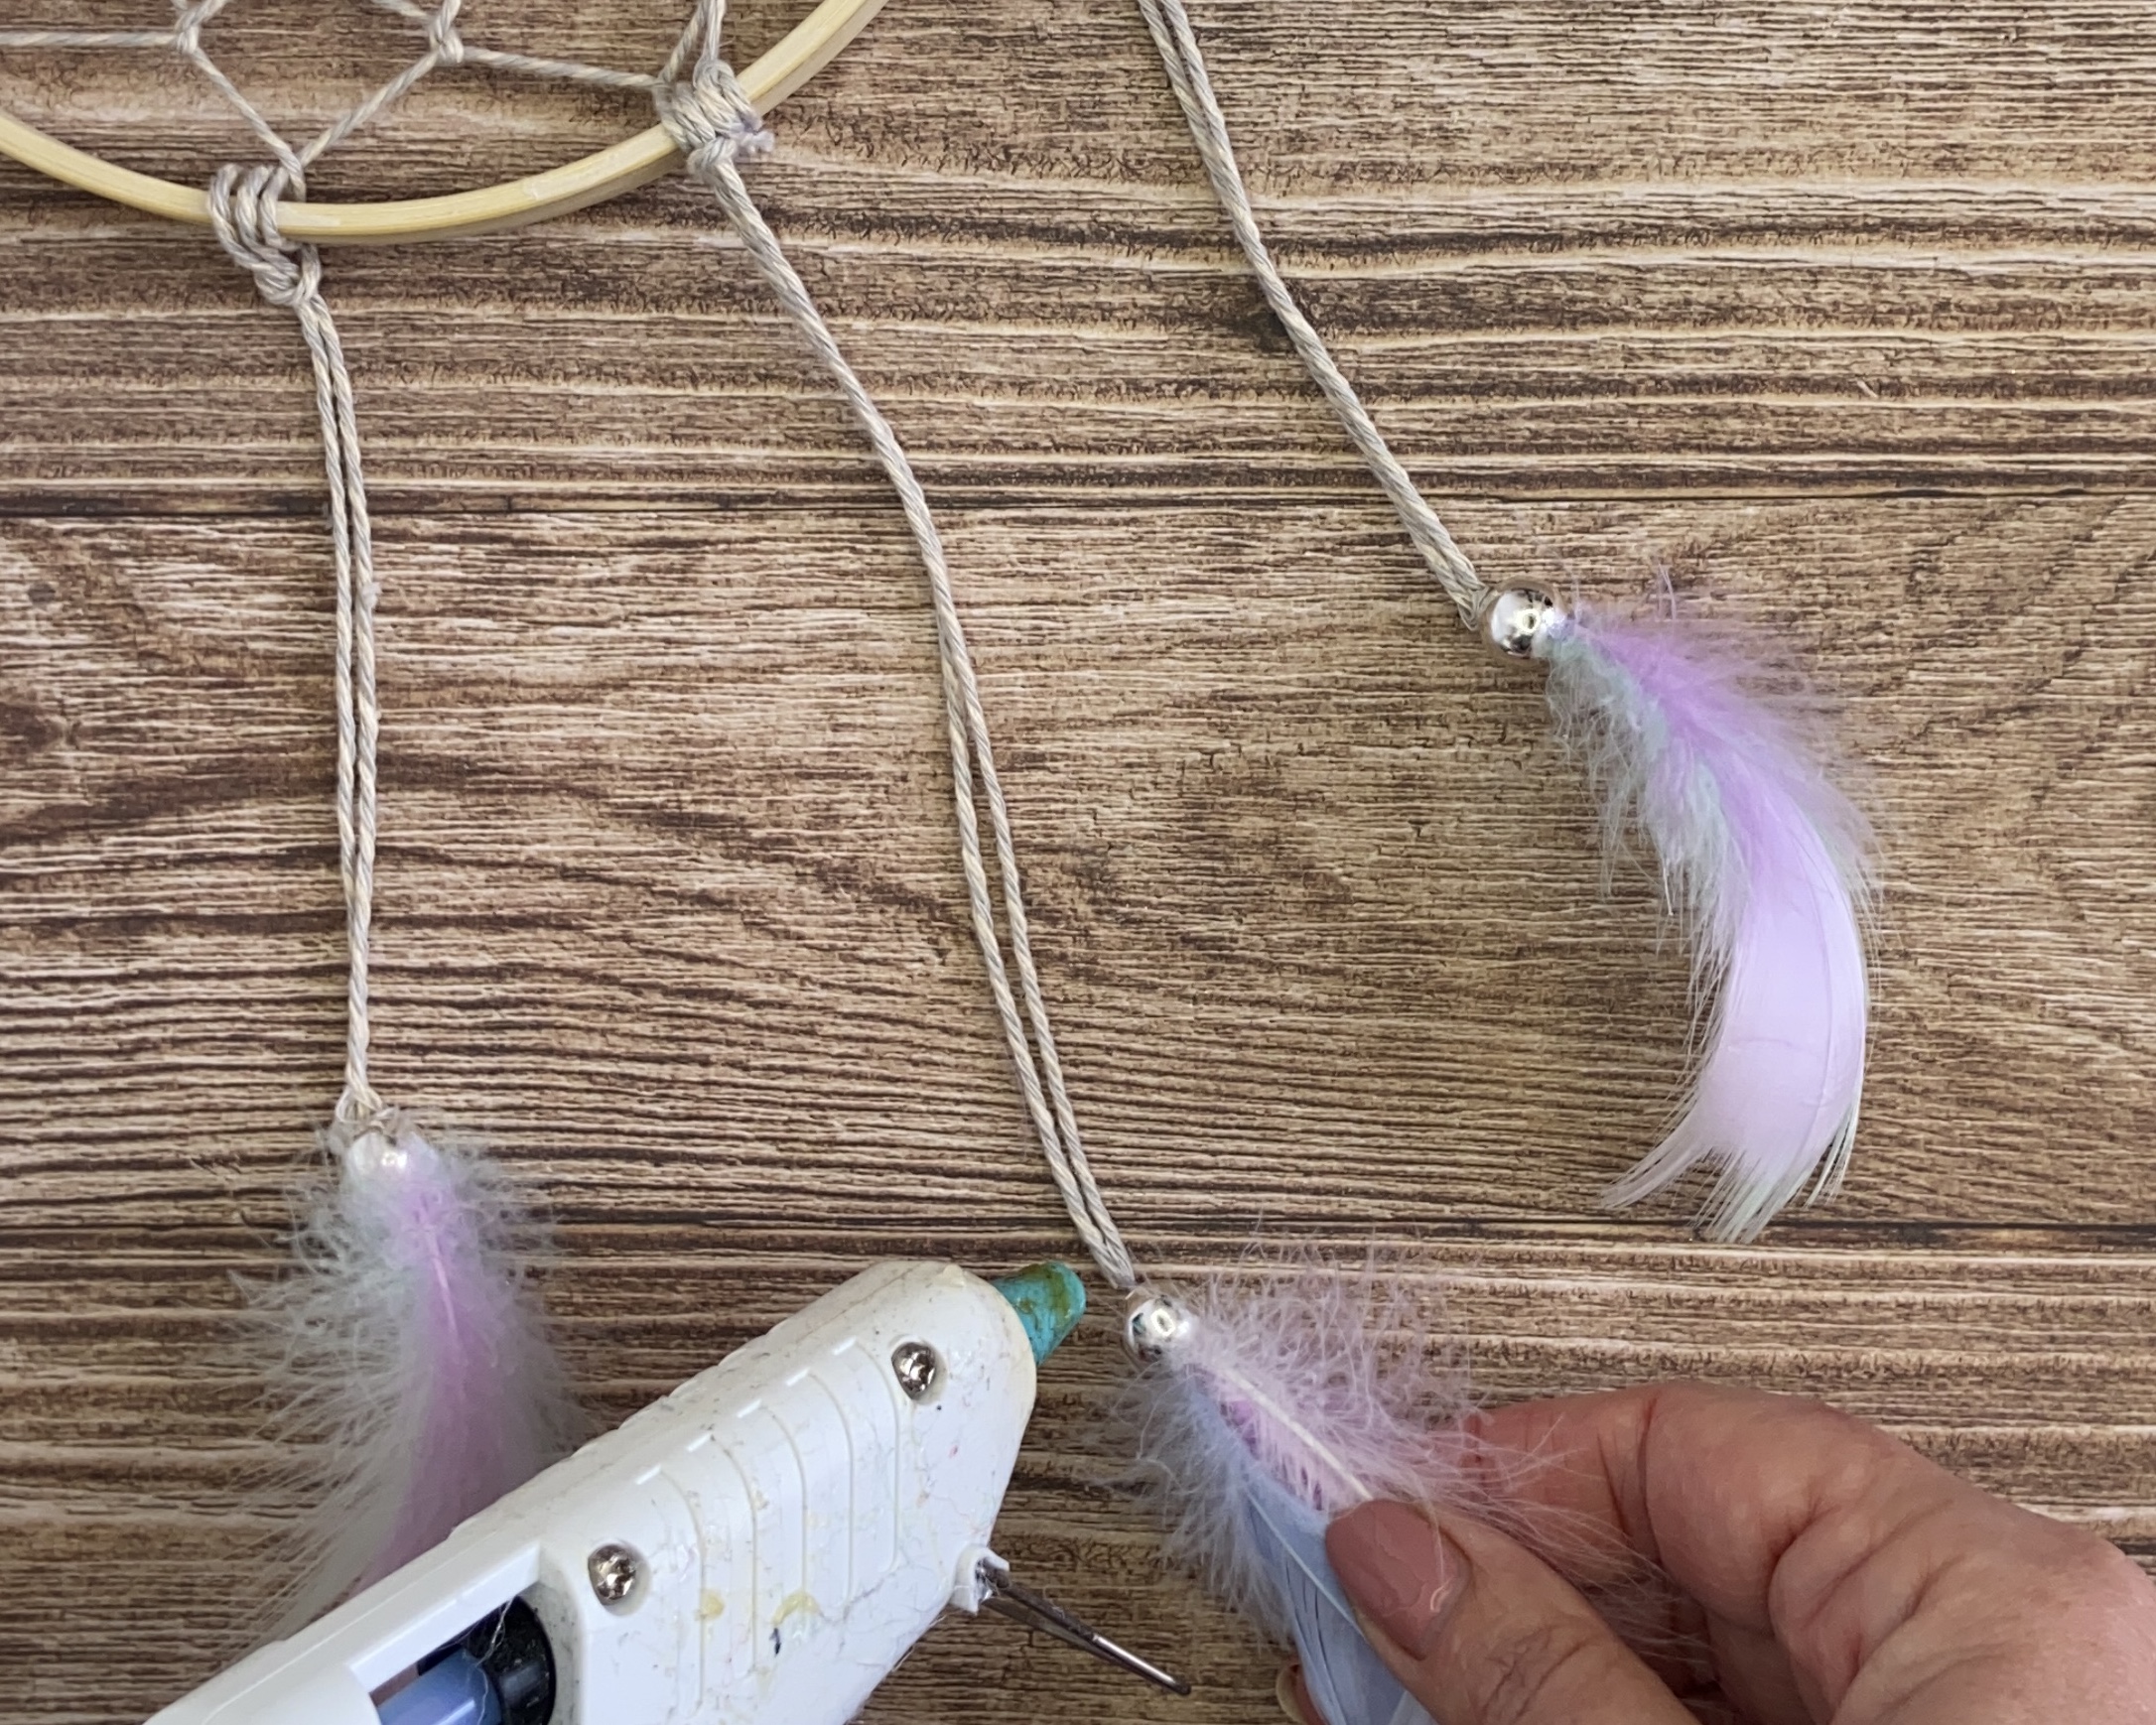 hands using glue gun to attach feather to length of cord under dreamcatcher